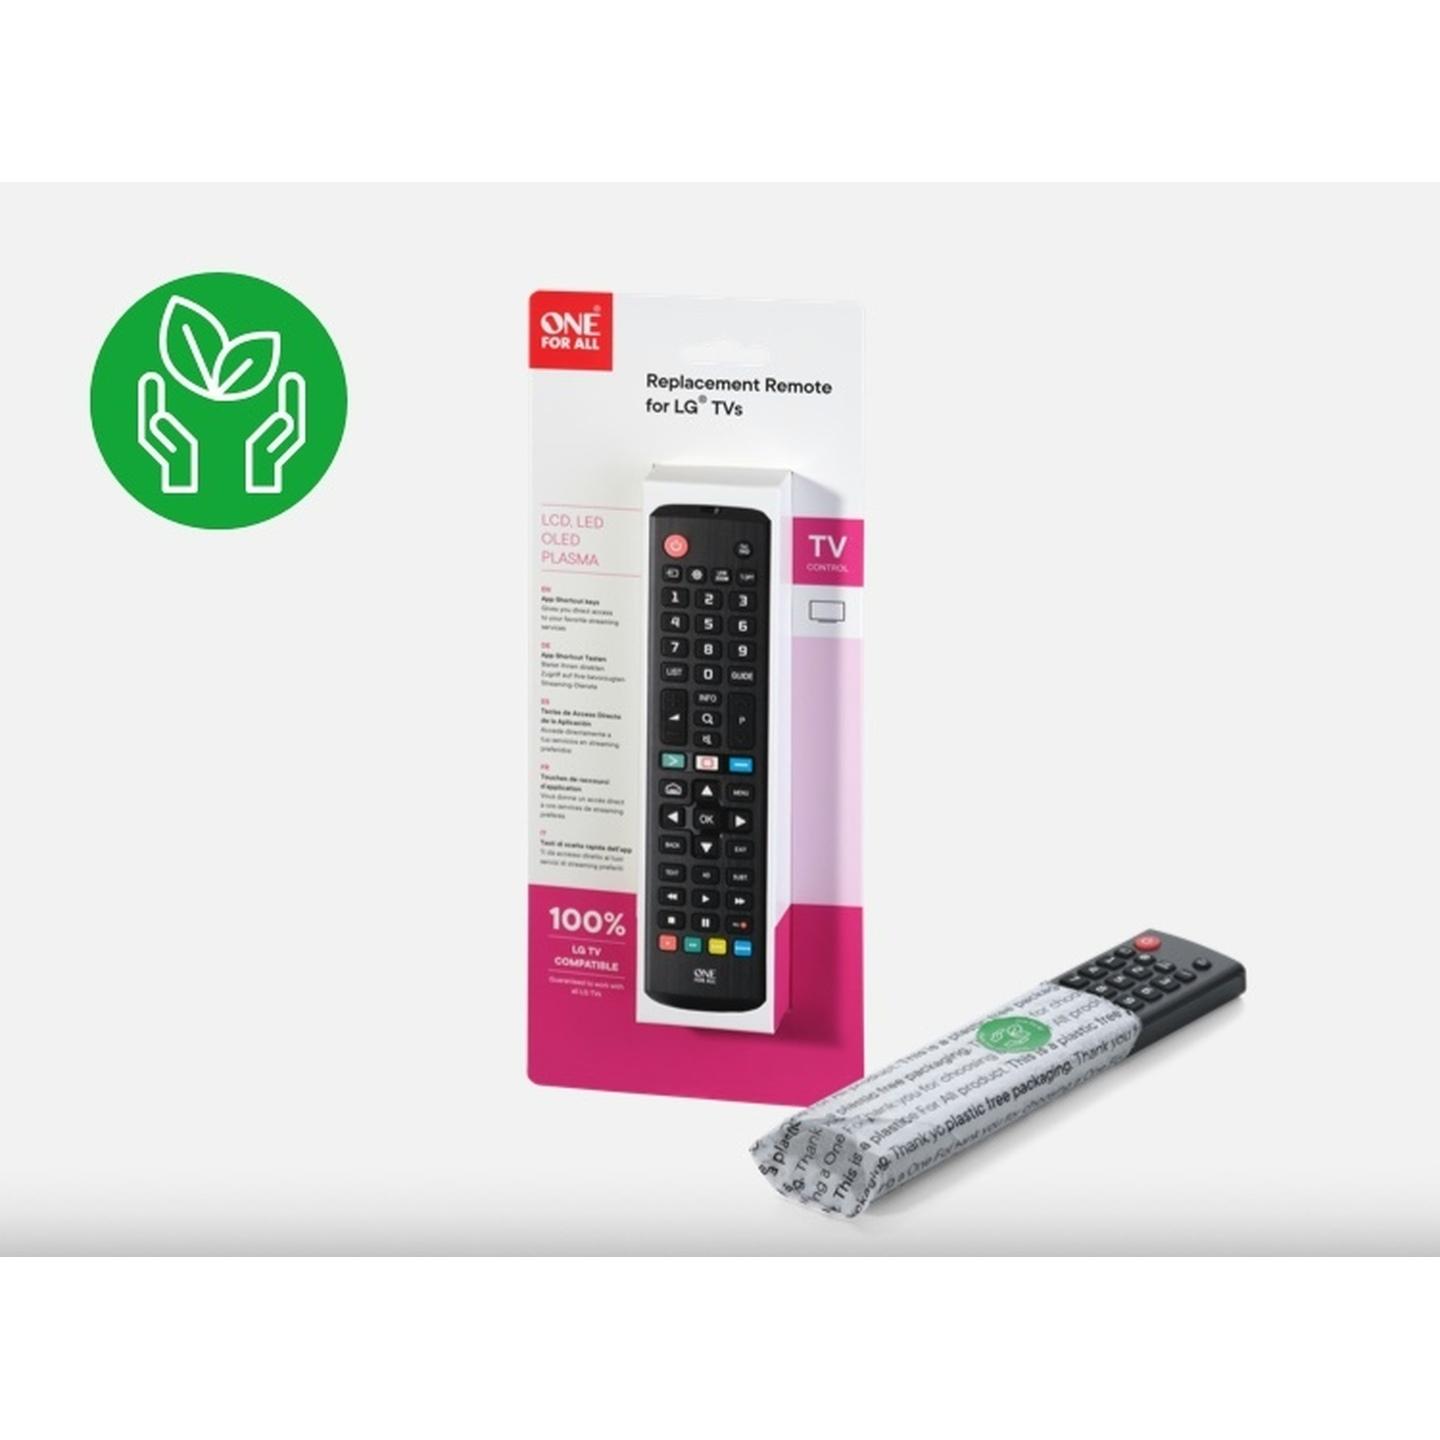 One For All Remote to suit LG TV with NET-TV